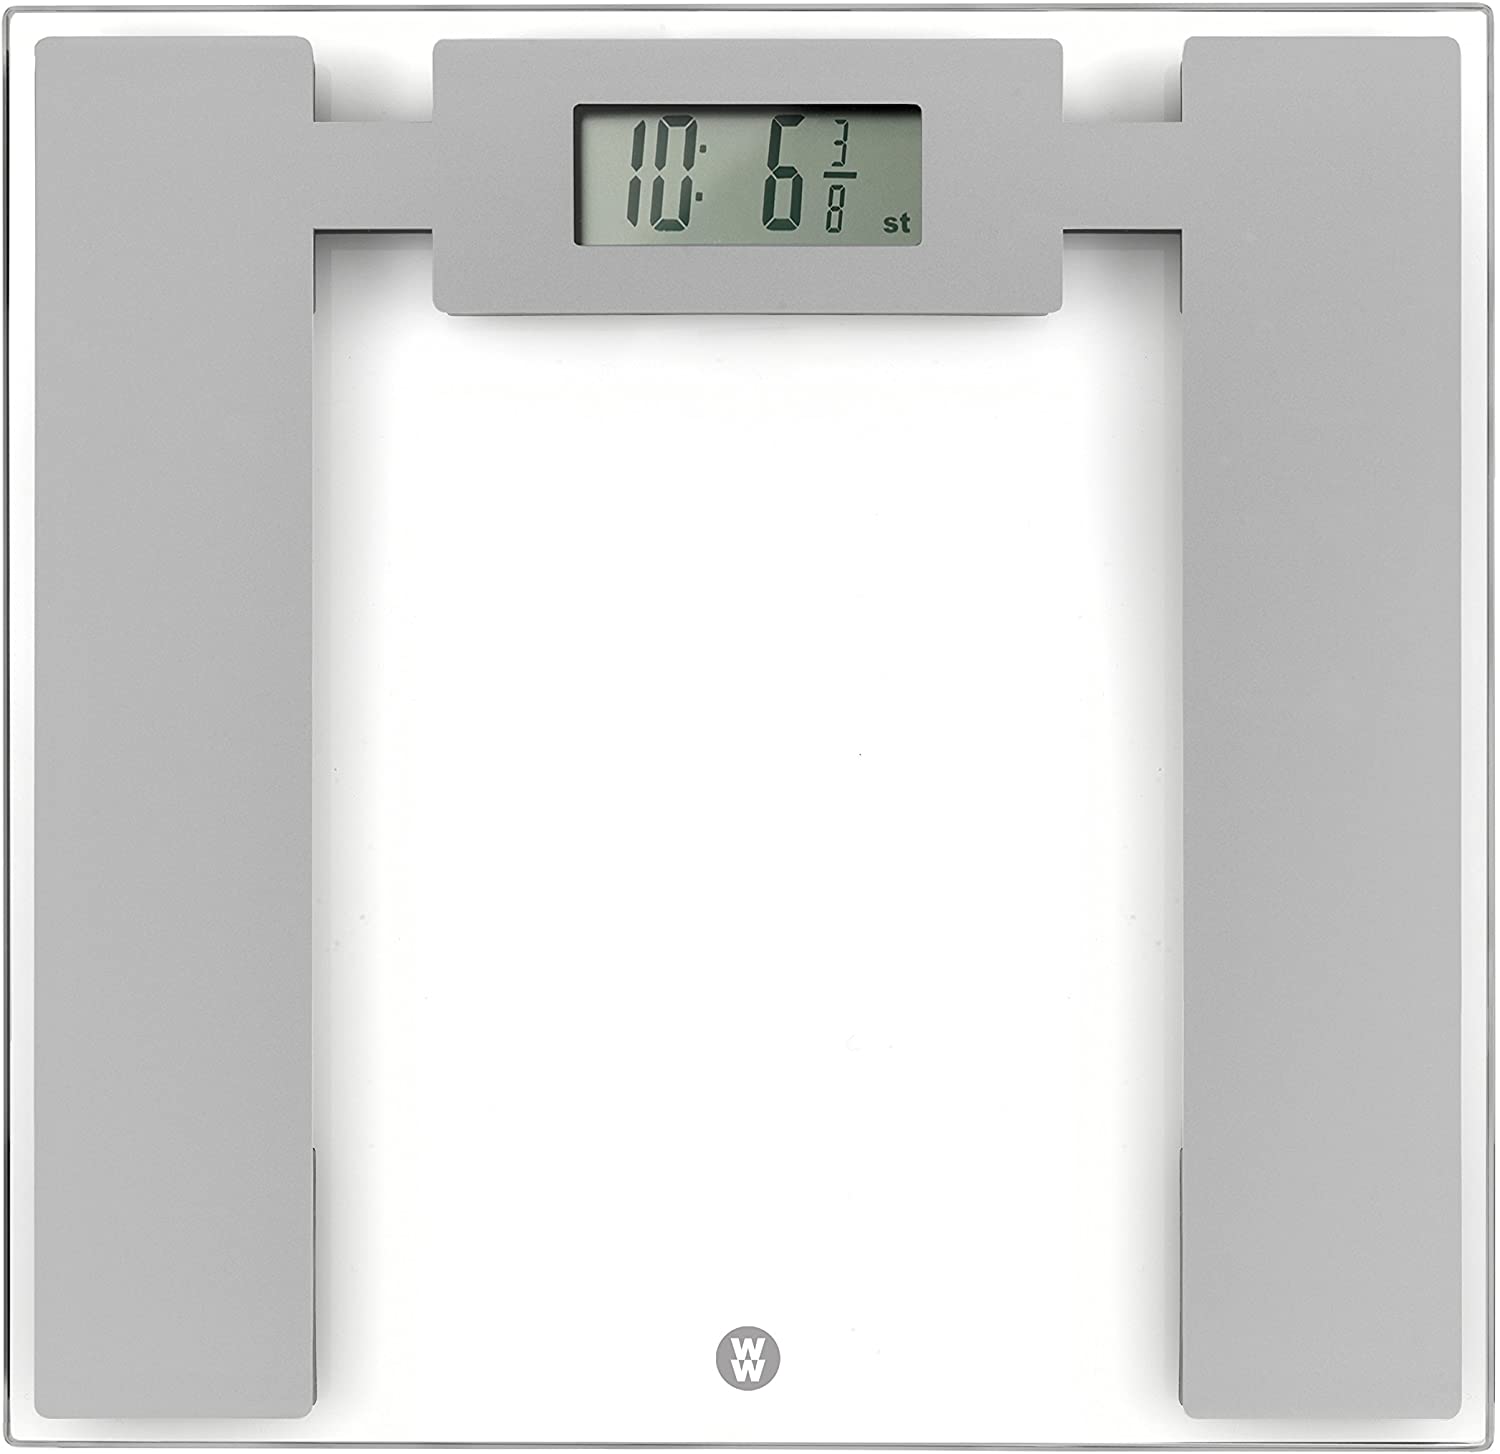 Weight Watchers 350 lbs. Digital White Bathroom Scale with Body